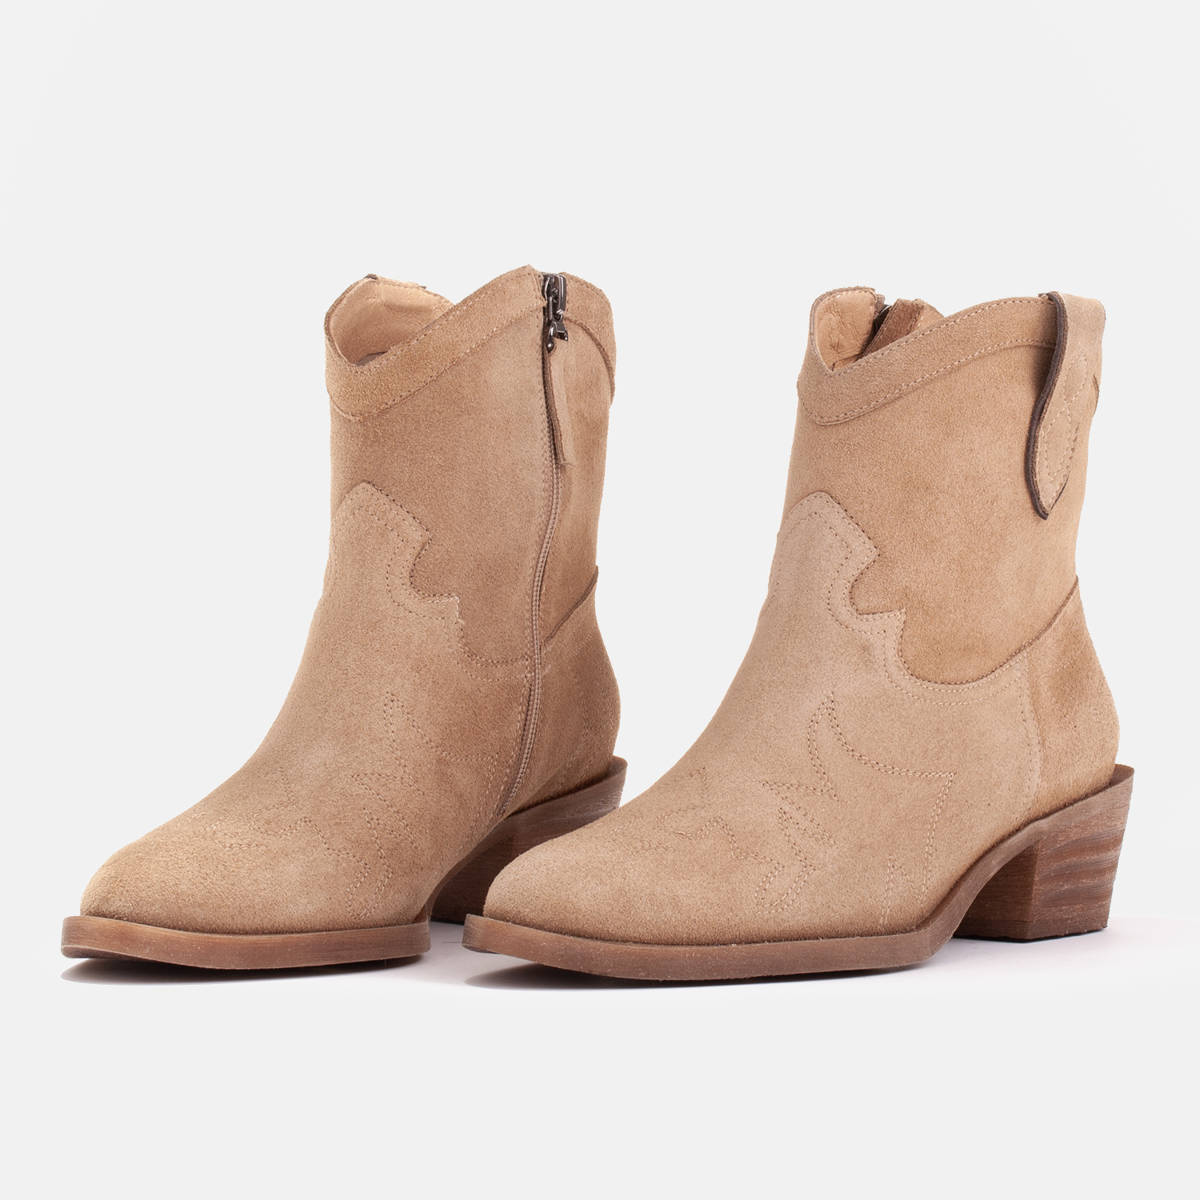 Comfortable cowboy boots made of natural suede